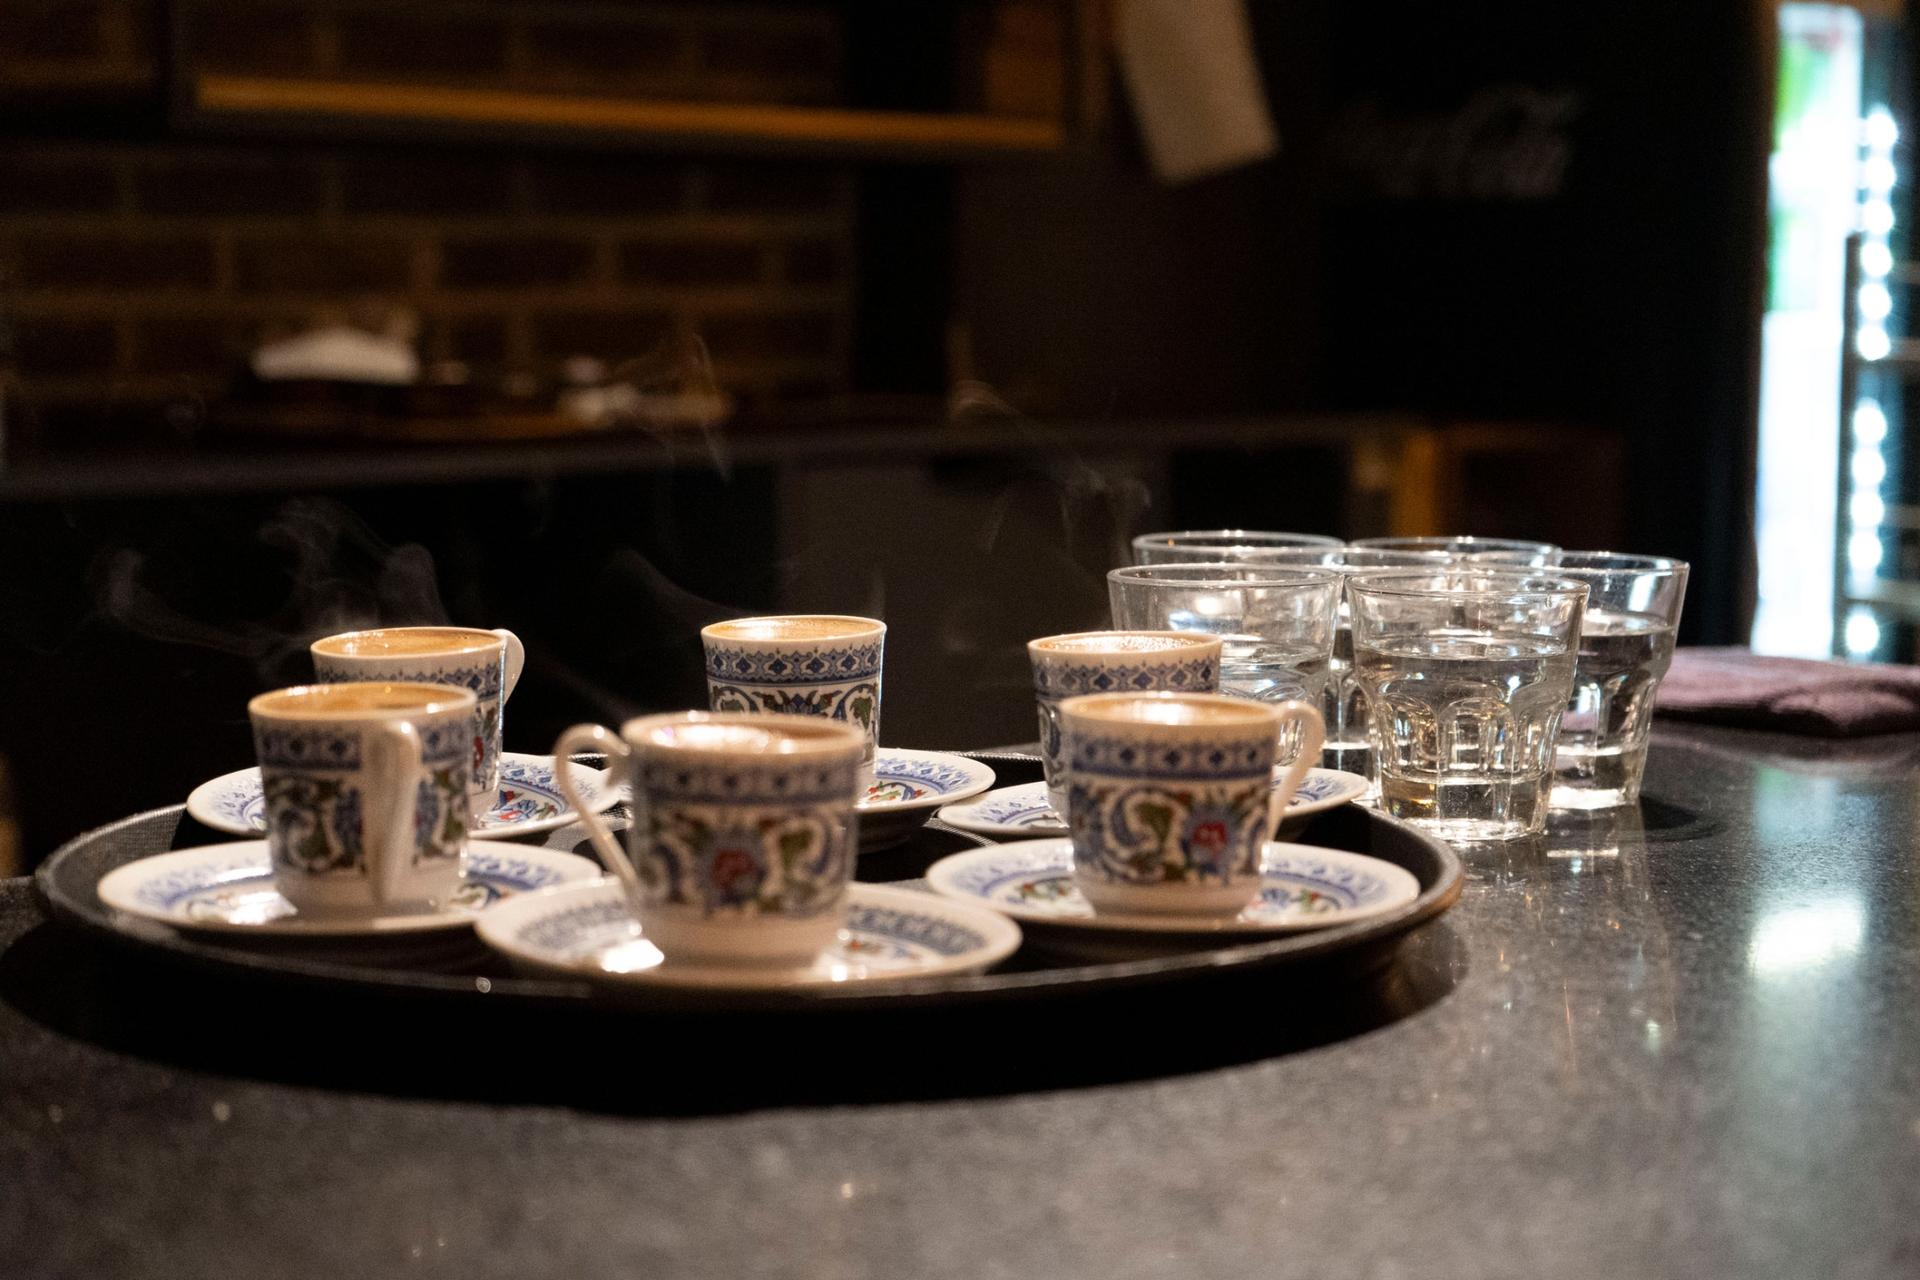 Steam emerges from small, delicate cups of bold Turkish coffee.